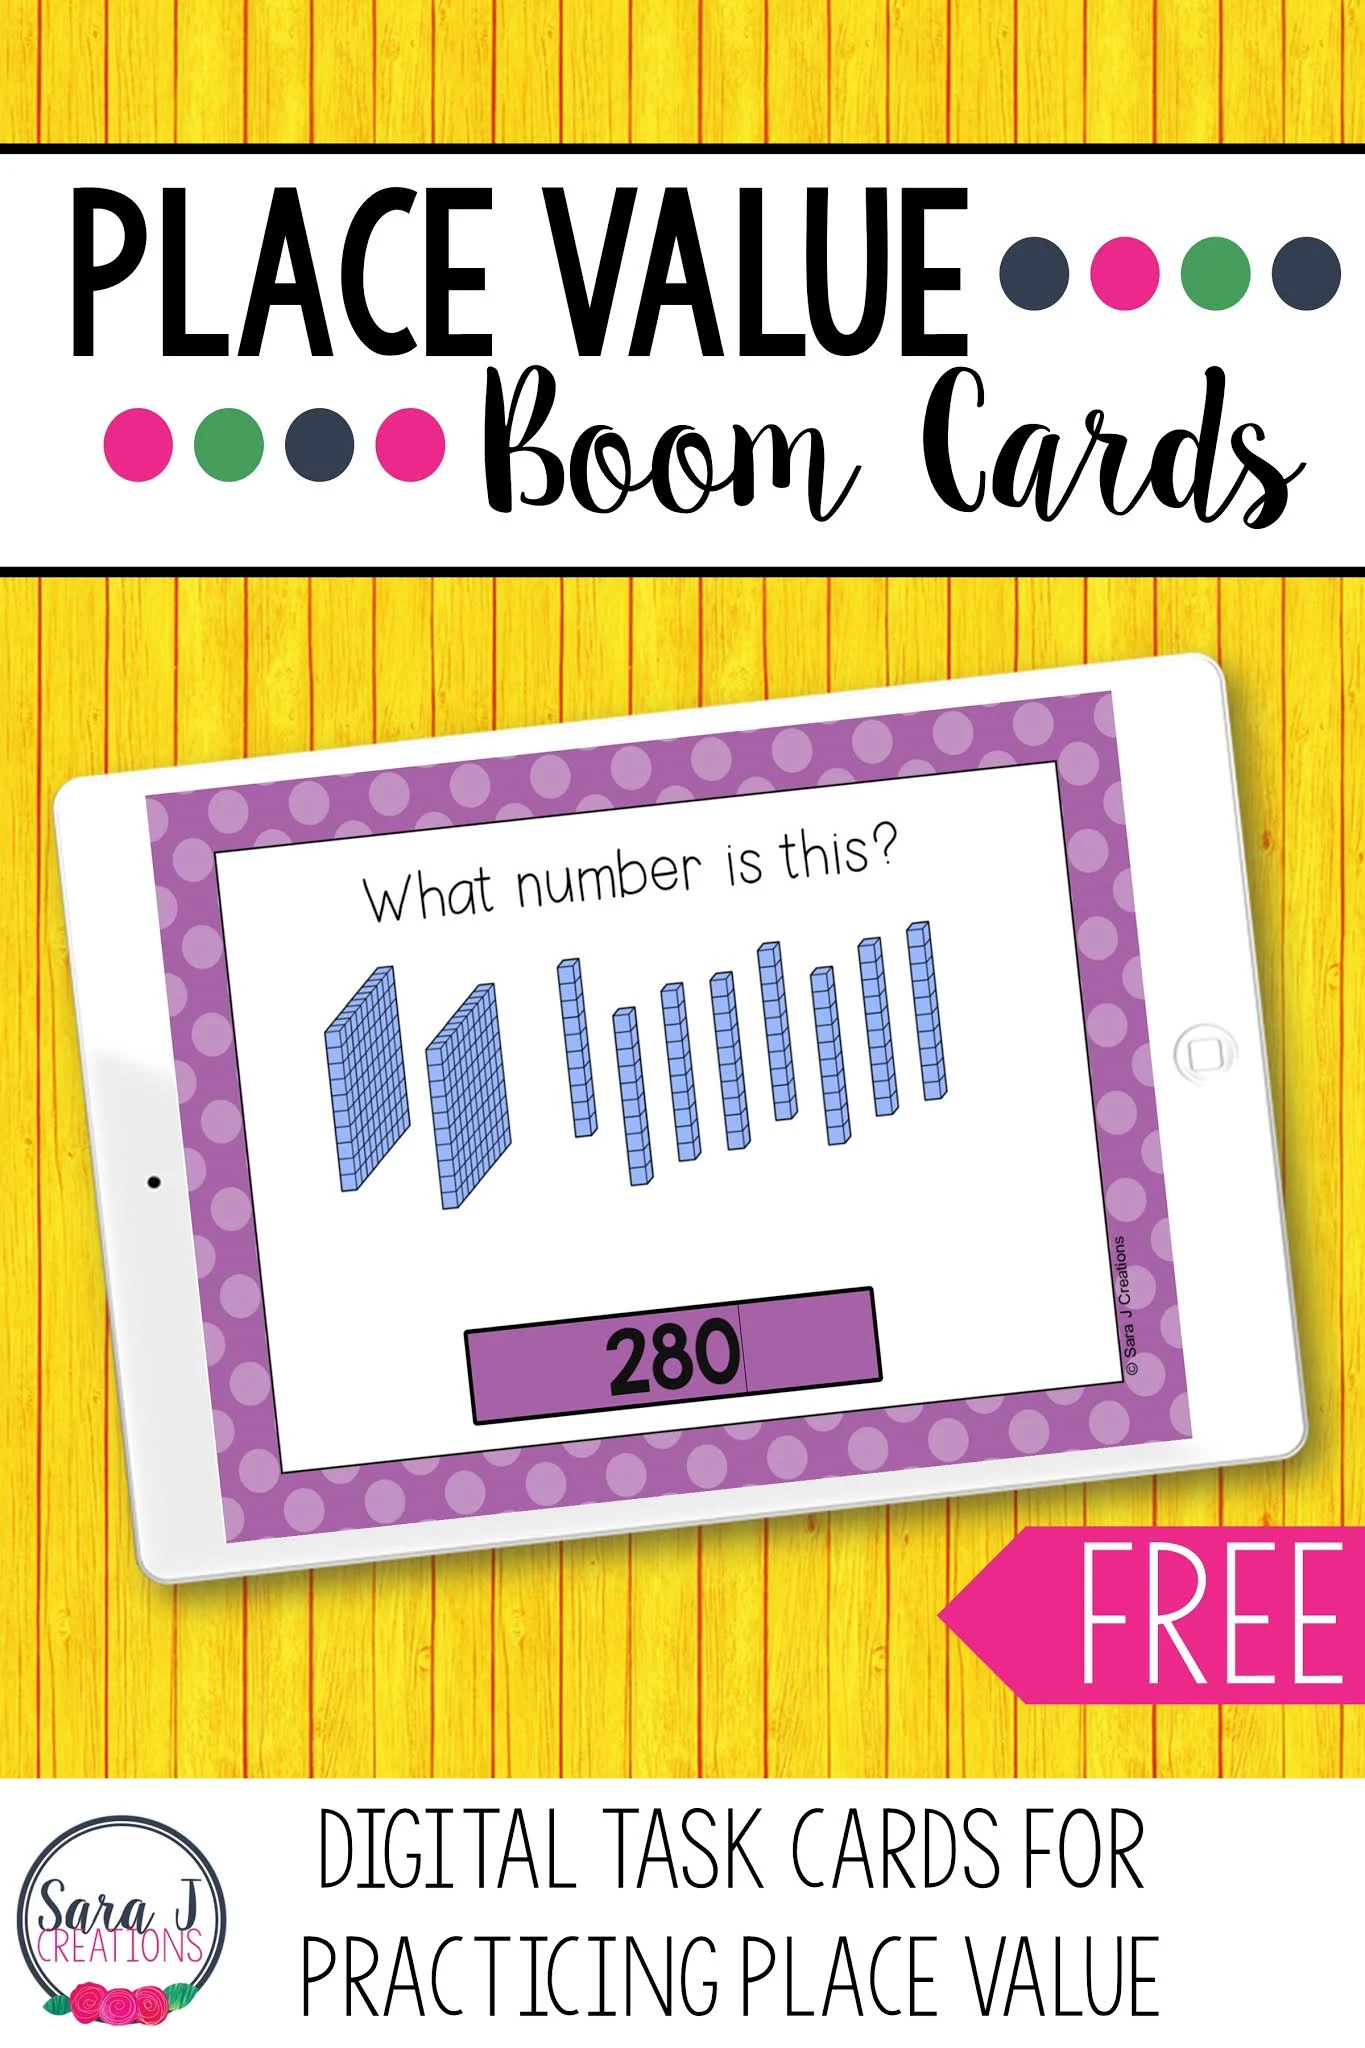 Make digital learning fun with these FREE, engaging, no prep Place Value Boom Cards. These digital task cards are perfect for remote learning but can also be used in a traditional classroom on devices such as ipads, tables, Chromebooks, smartboards, and more. Designed for 2nd grade, these place value task cards include numbers up to 1,000.